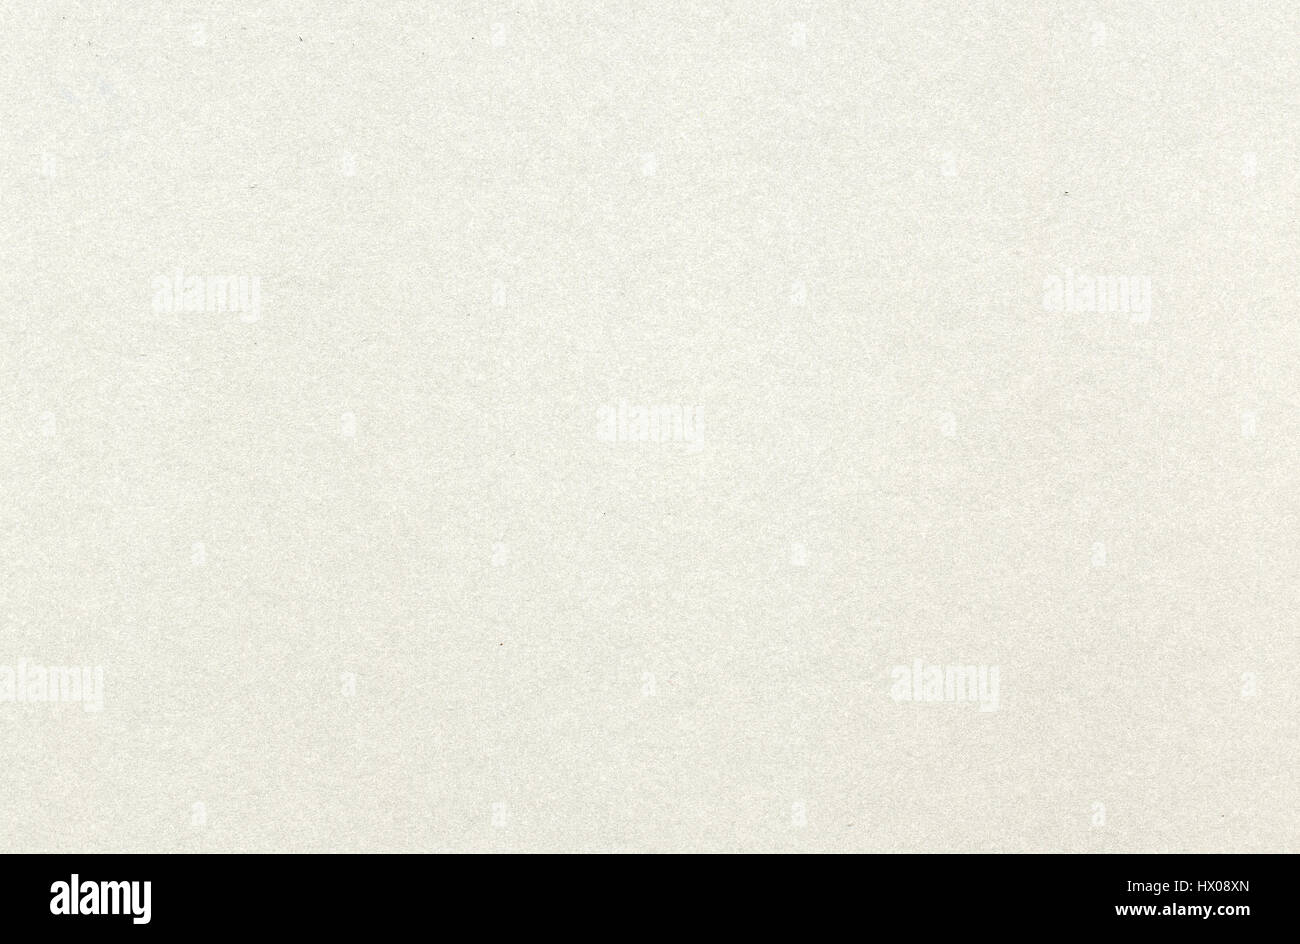 off white paper texture useful as a background Stock Photo - Alamy